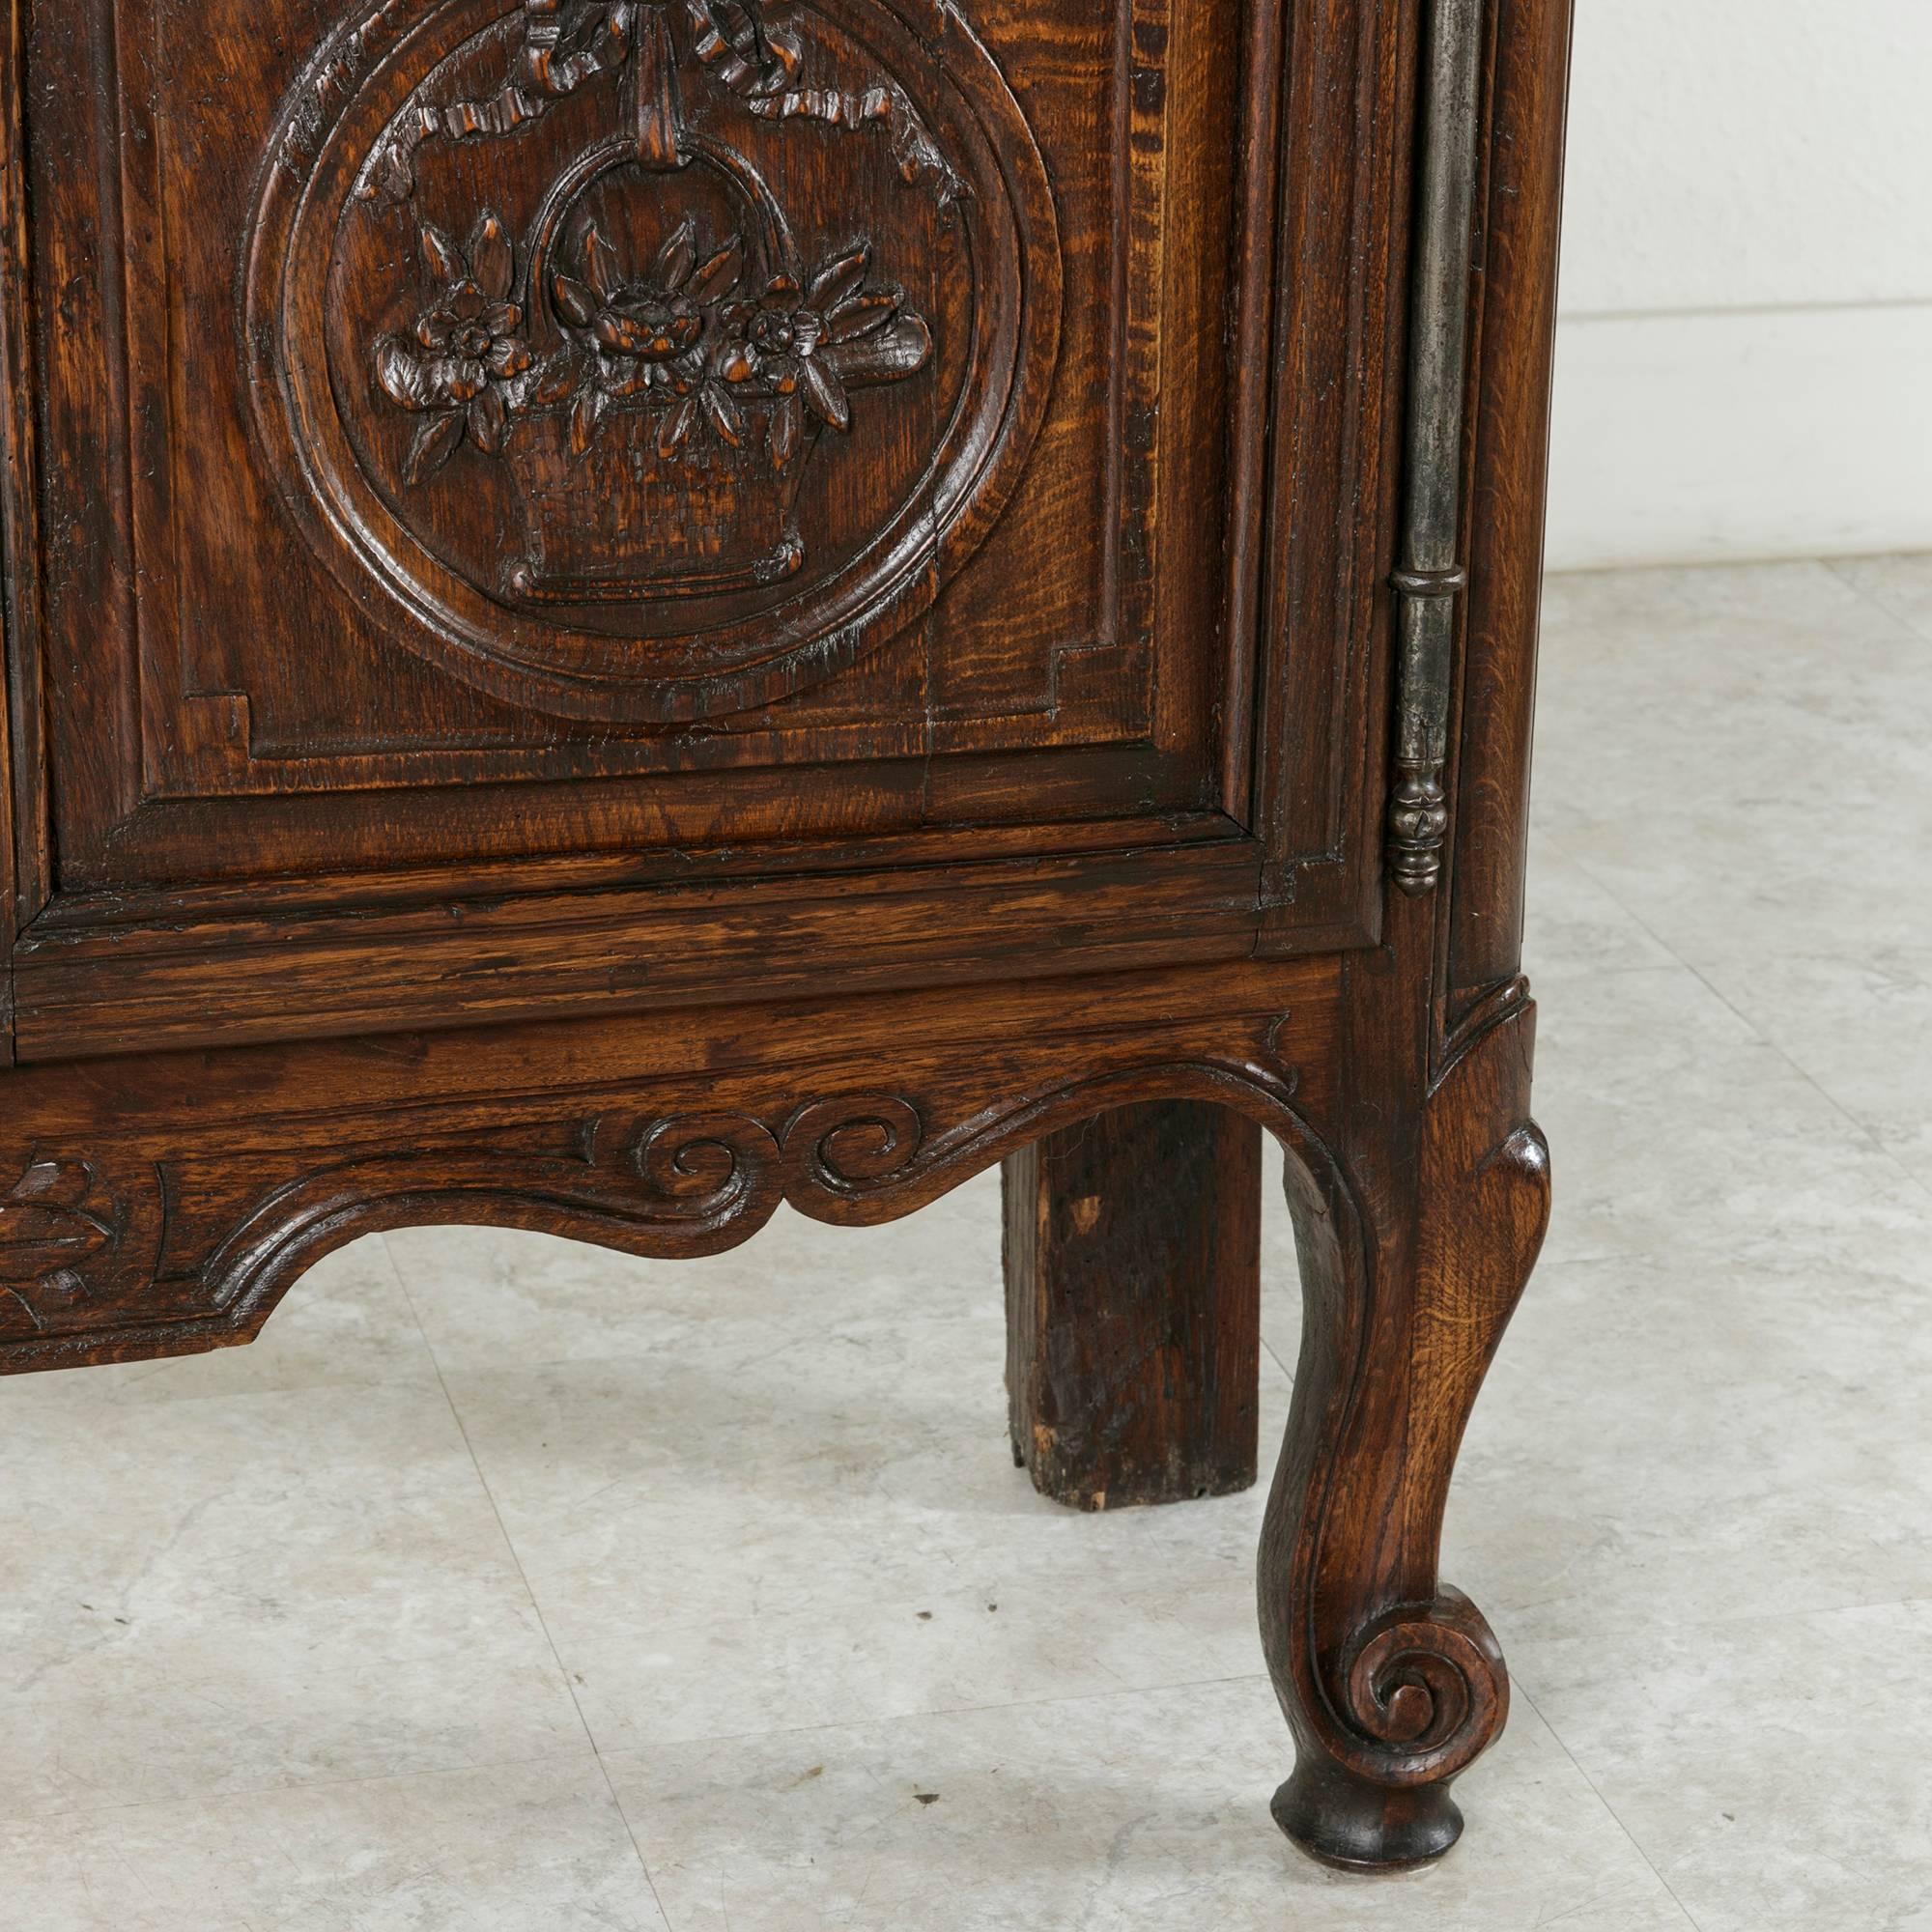 This 19th century hand carved oak Louis XV style vitrine features Classic Normandy baskets in deep relief, long fiche hinges and original glass. The French oak has aged to a beautiful deep hue, while the hand carved ornamentation is carried across